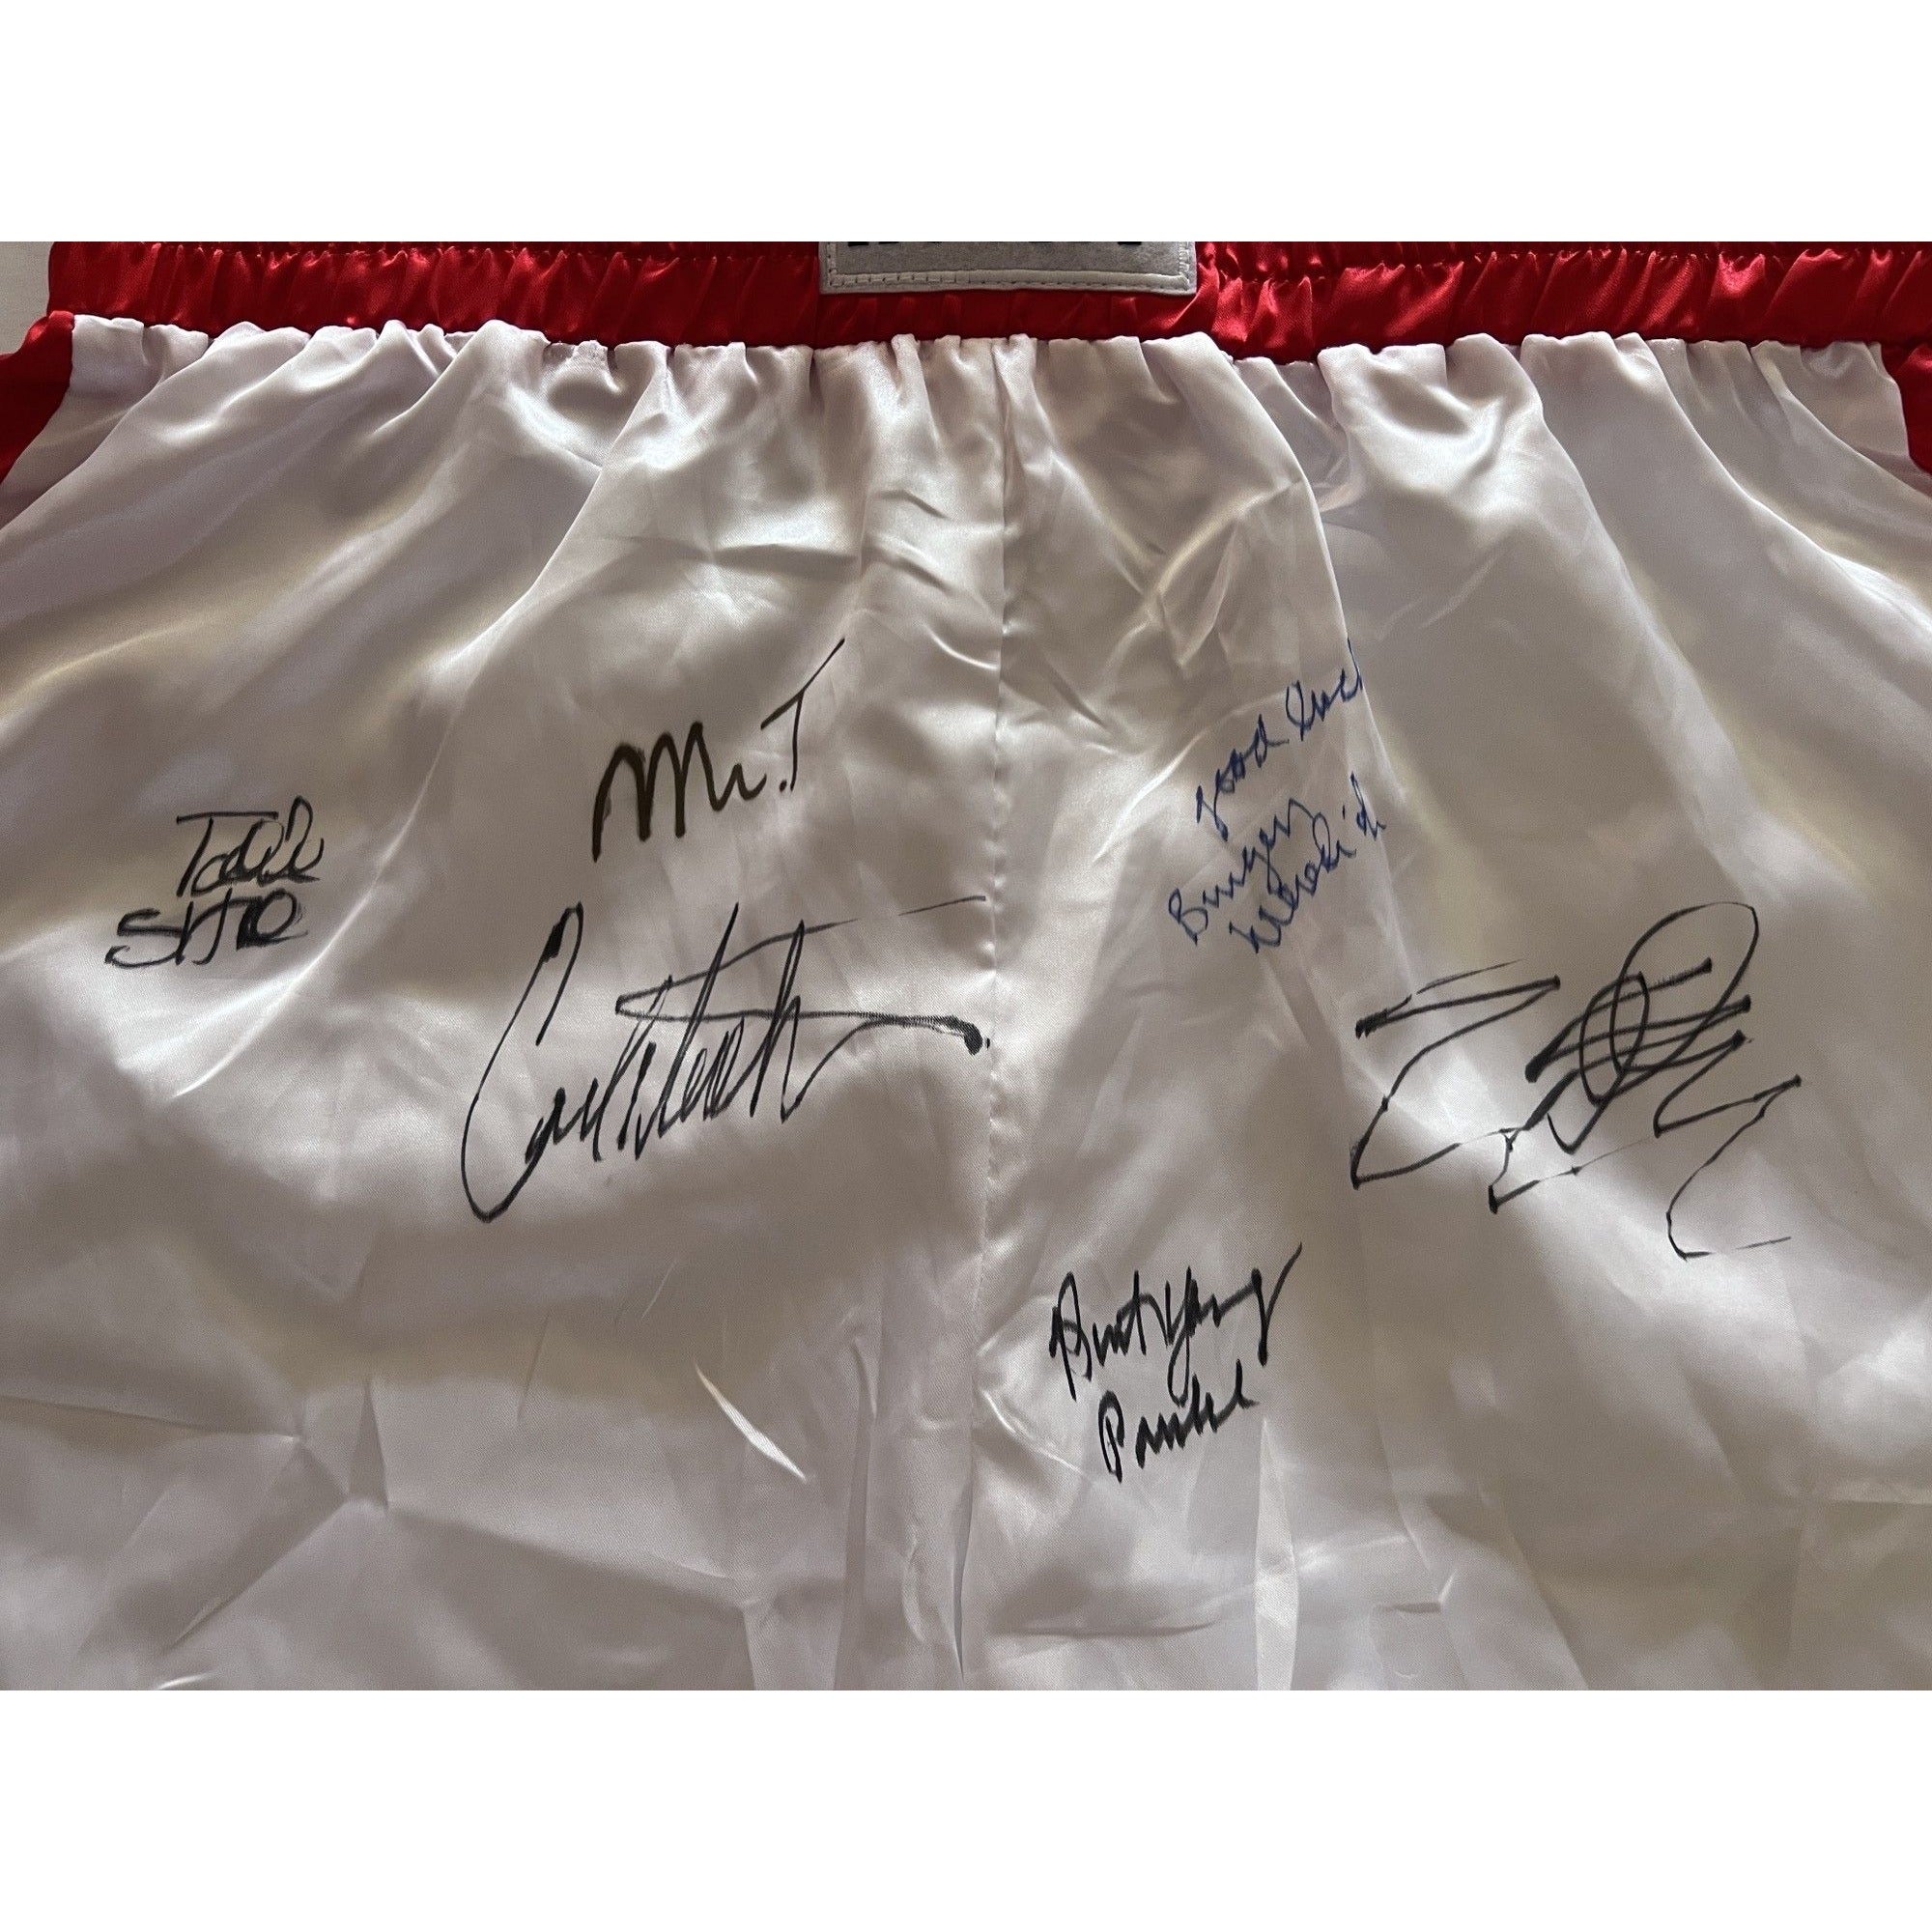 Sylvester Stallone Rocky Balboa boxing trunks with proof